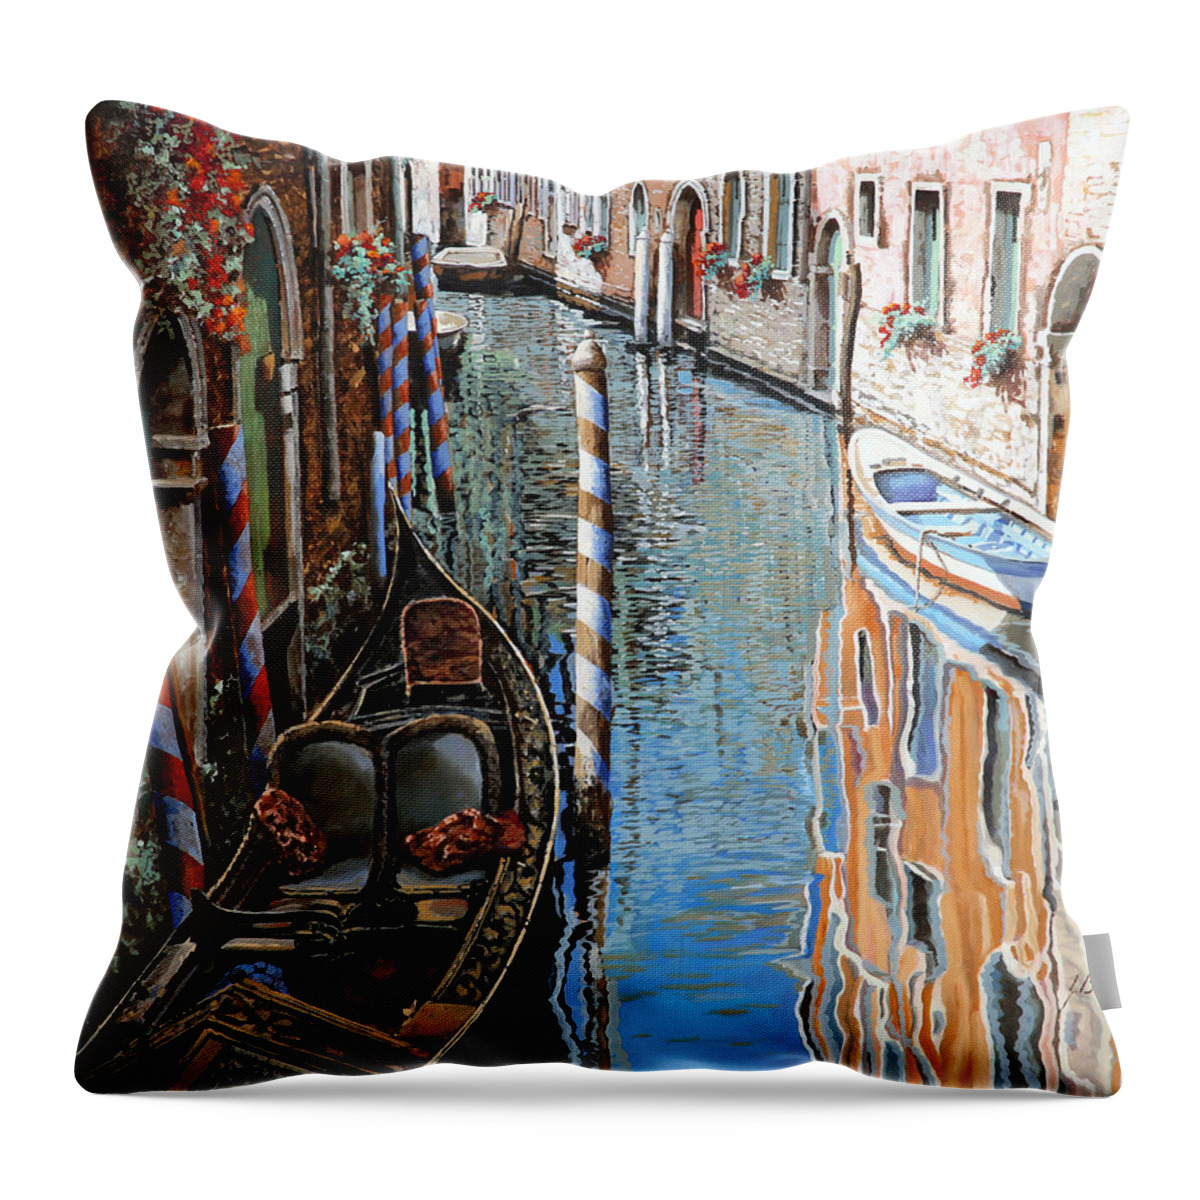 Venice Throw Pillow featuring the painting La Barca Al Sole by Guido Borelli